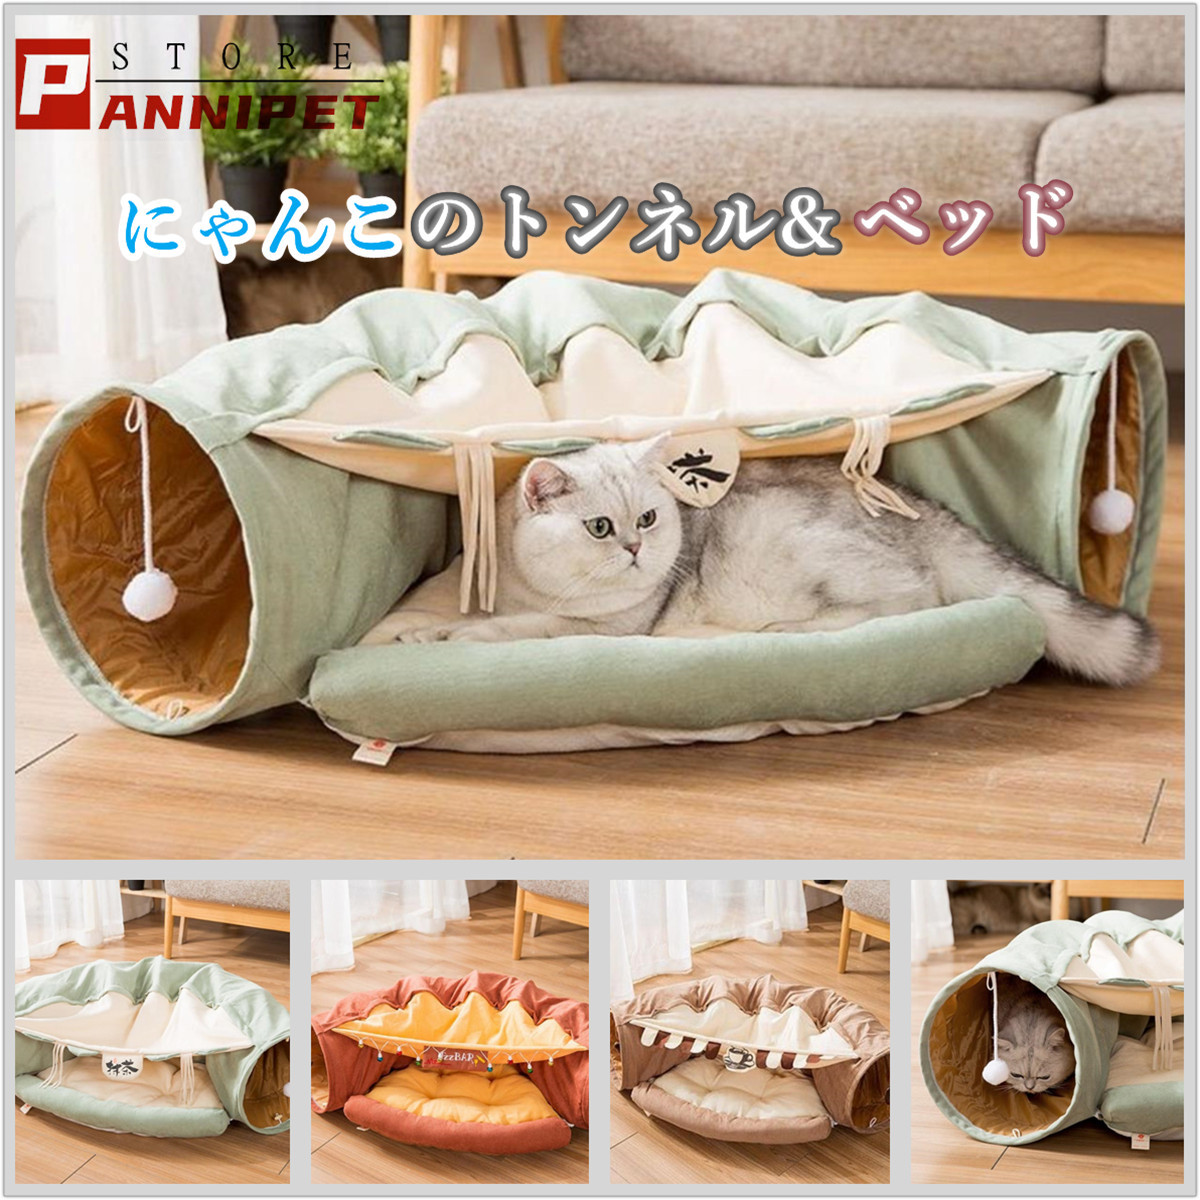  cat tunnel cat house cat bed cat tunnel 2in1 many head playing correspondence playing place dome type cat bed folding possible is possible to choose 3 color 